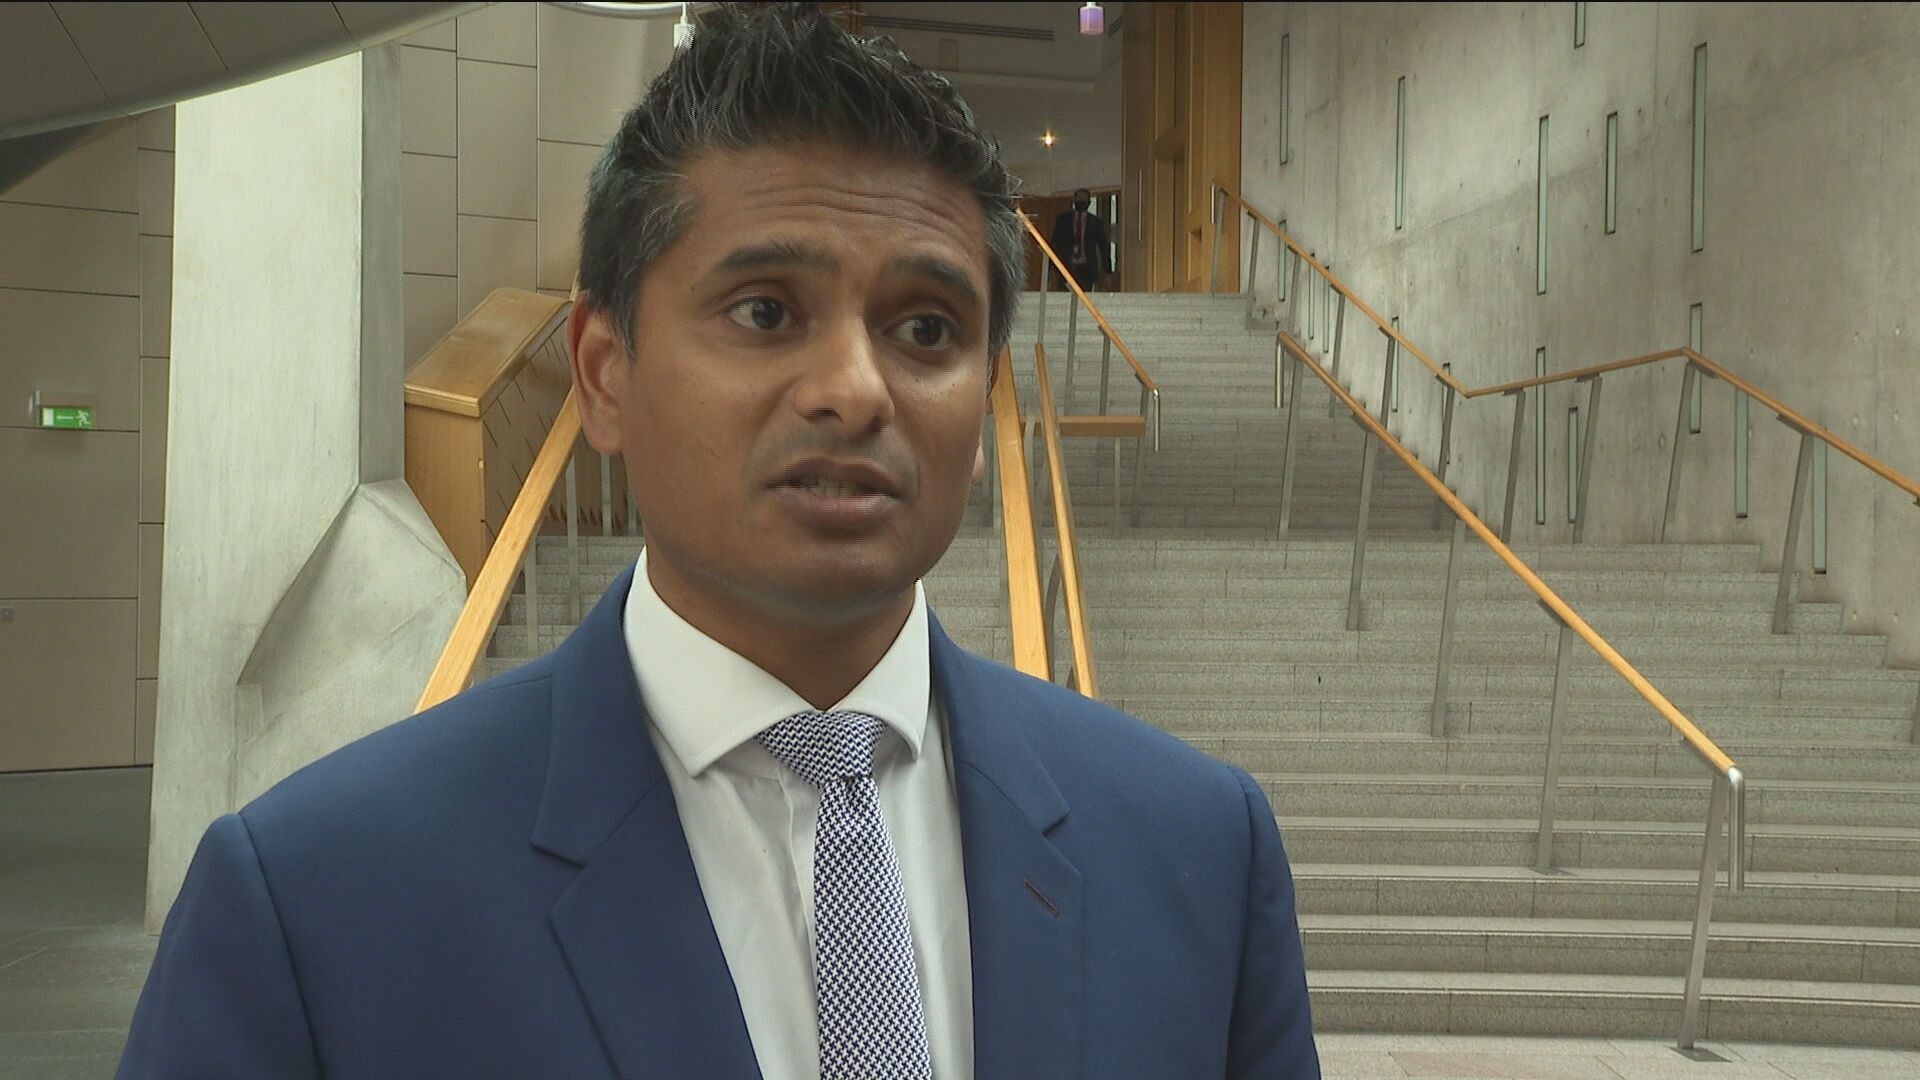 Scottish Conservative MSP Dr Sandesh Gulhane has warned that one of the legacies of Covid could be a rise in dental inequalities. (STV News)